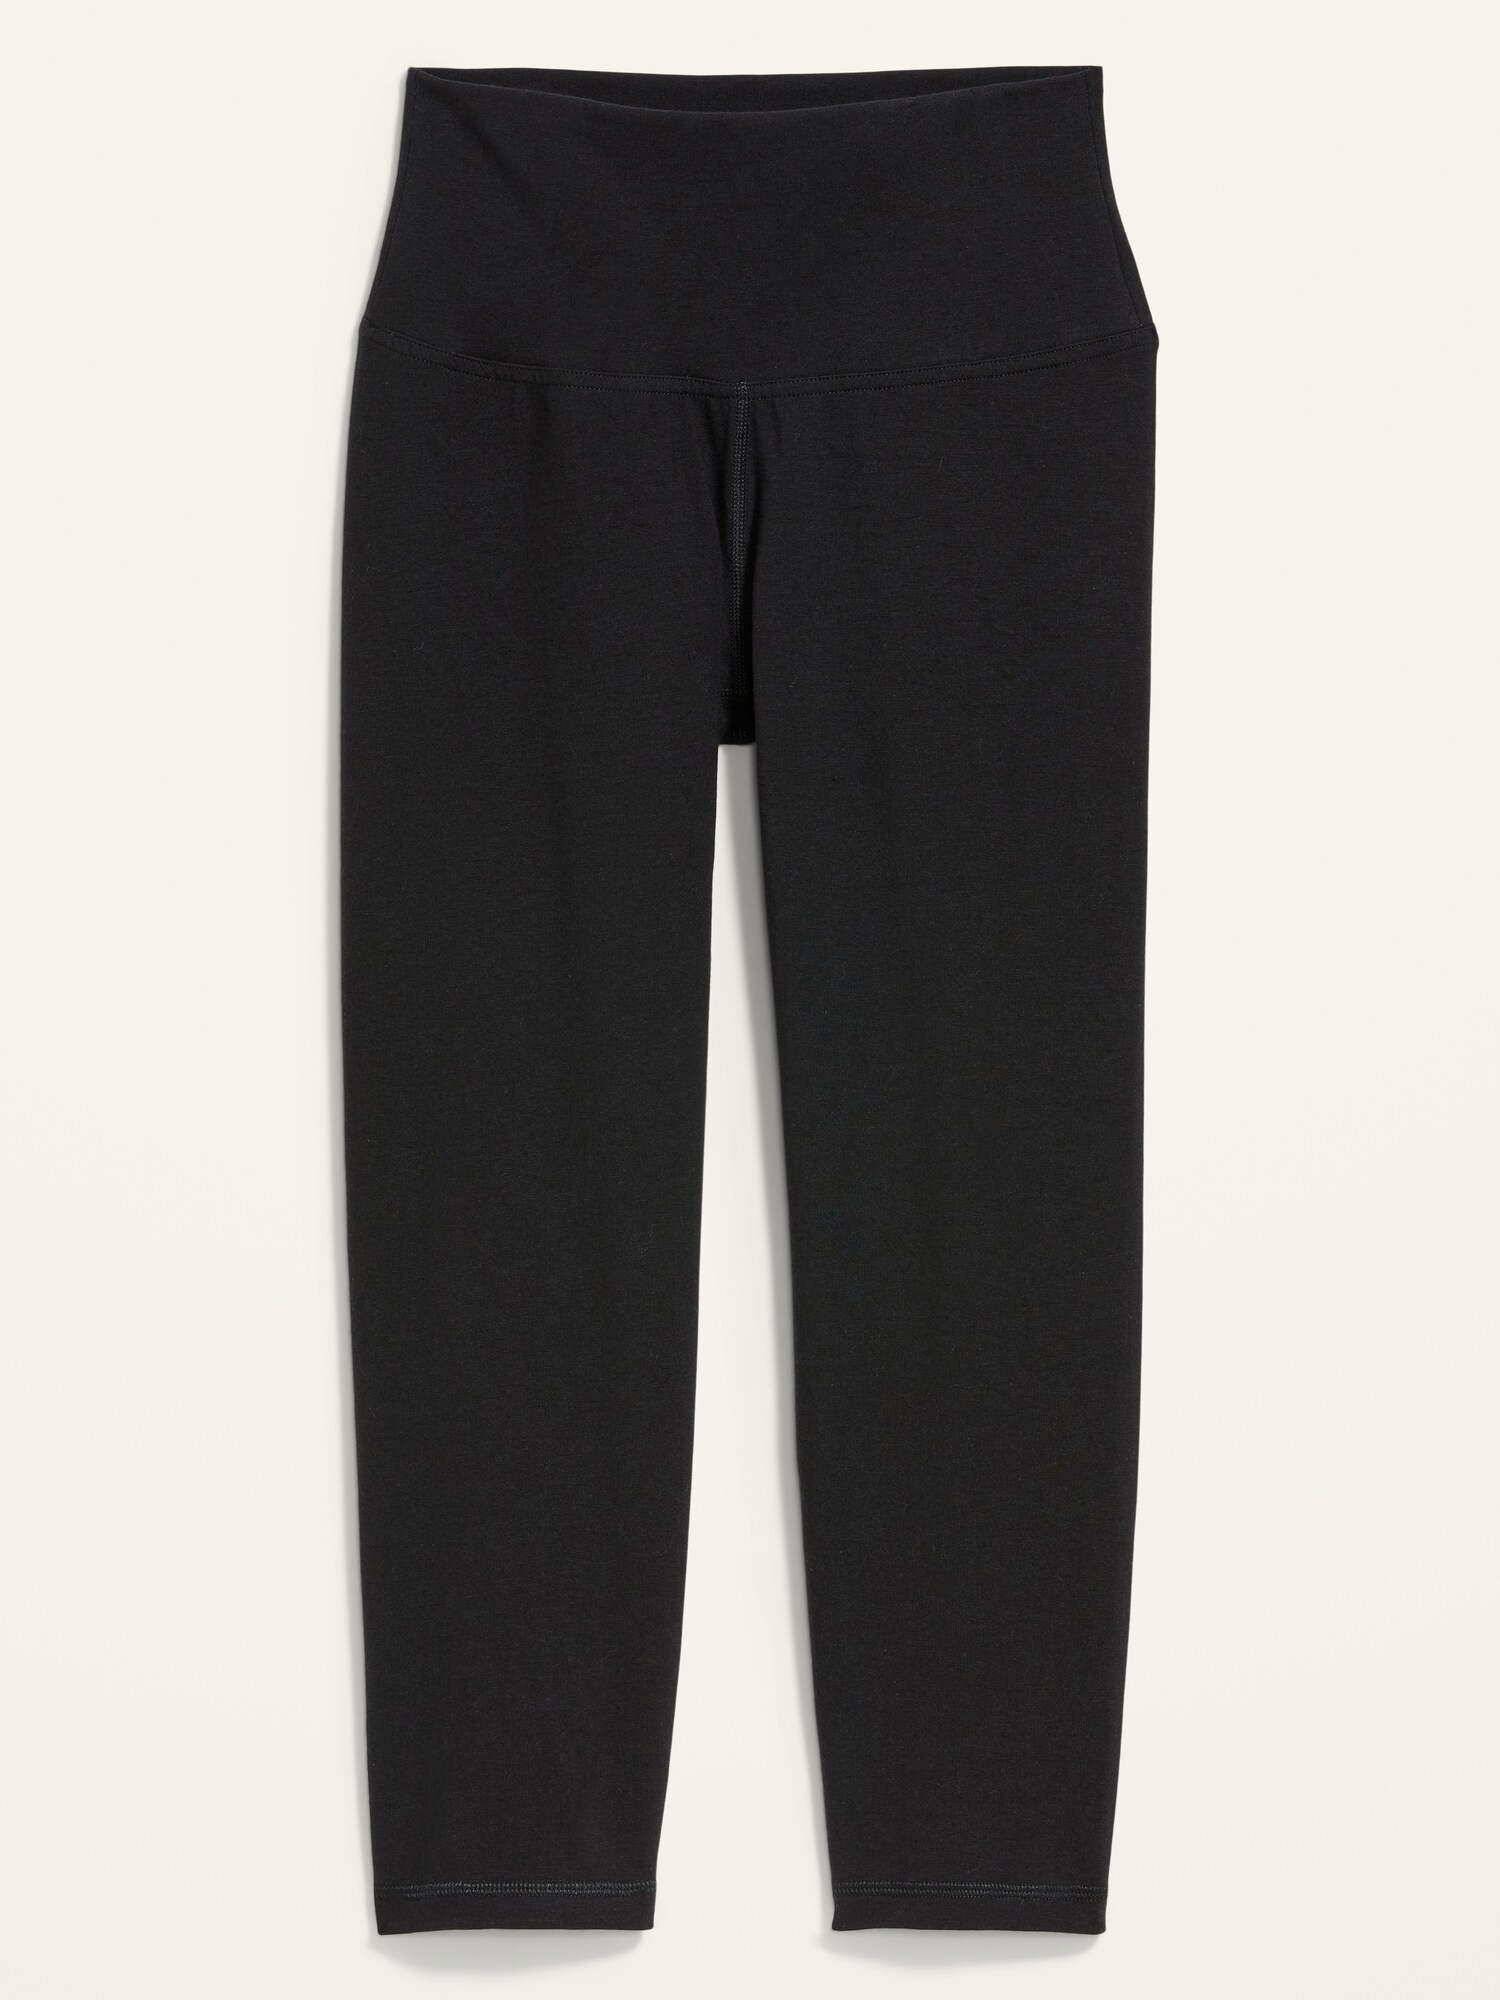 High-Waisted Crop Leggings For Women | Old Navy